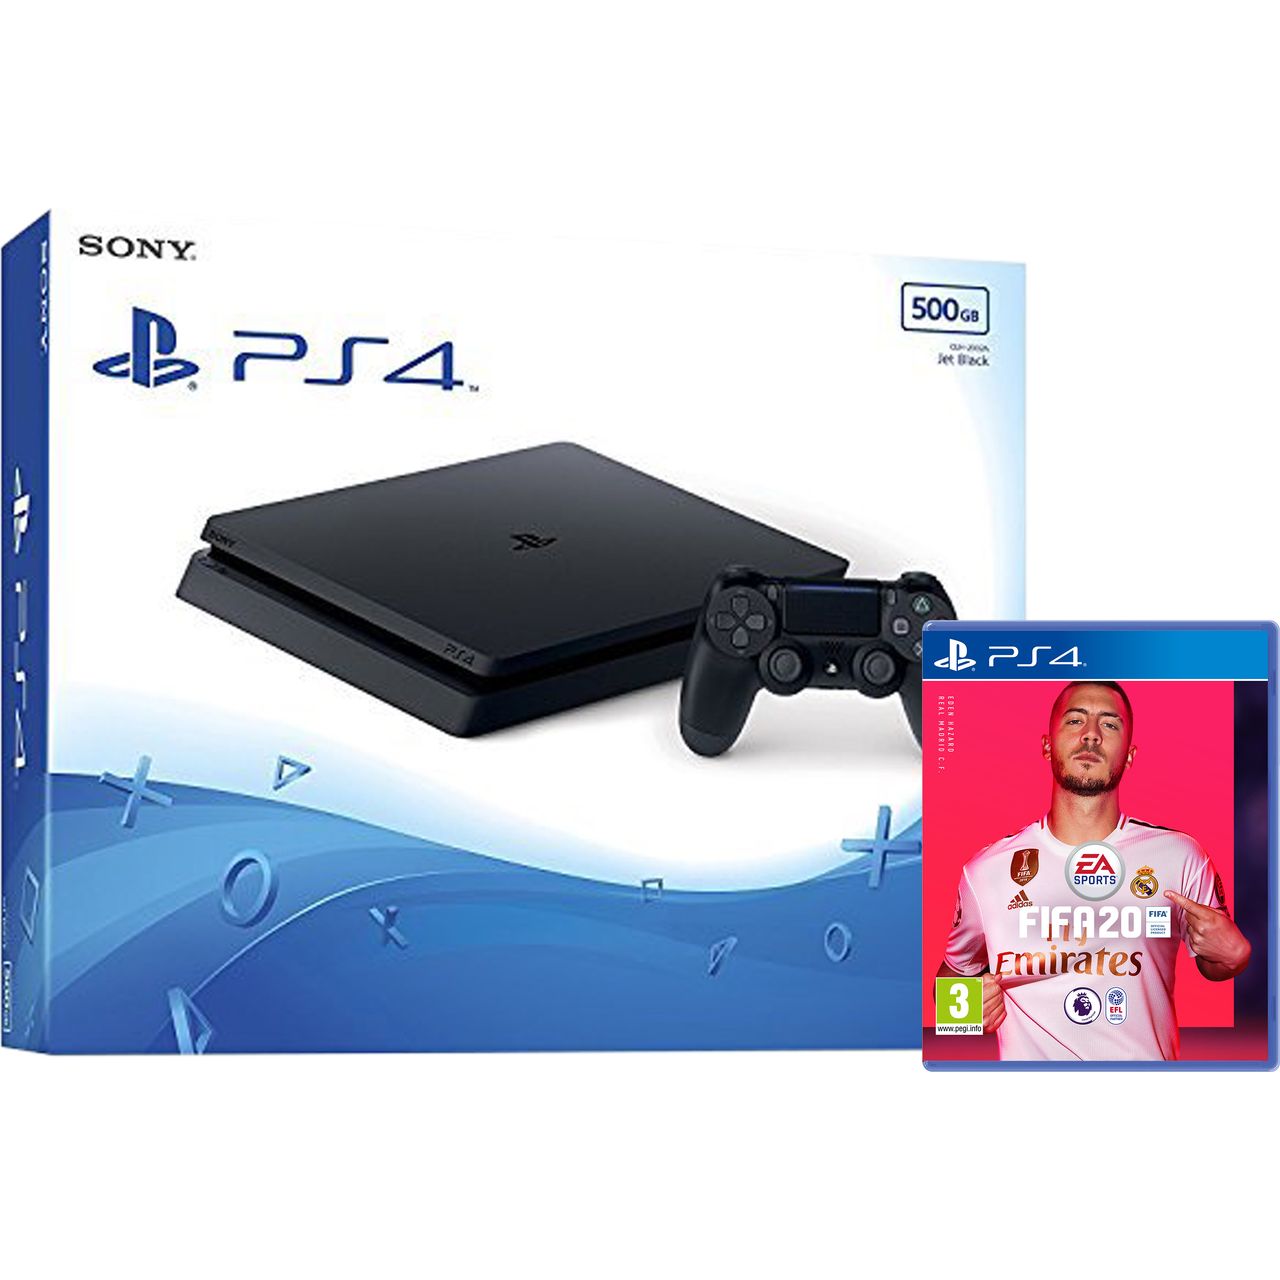 PlayStation 4 500GB with FIFA 20 (Disc) Review